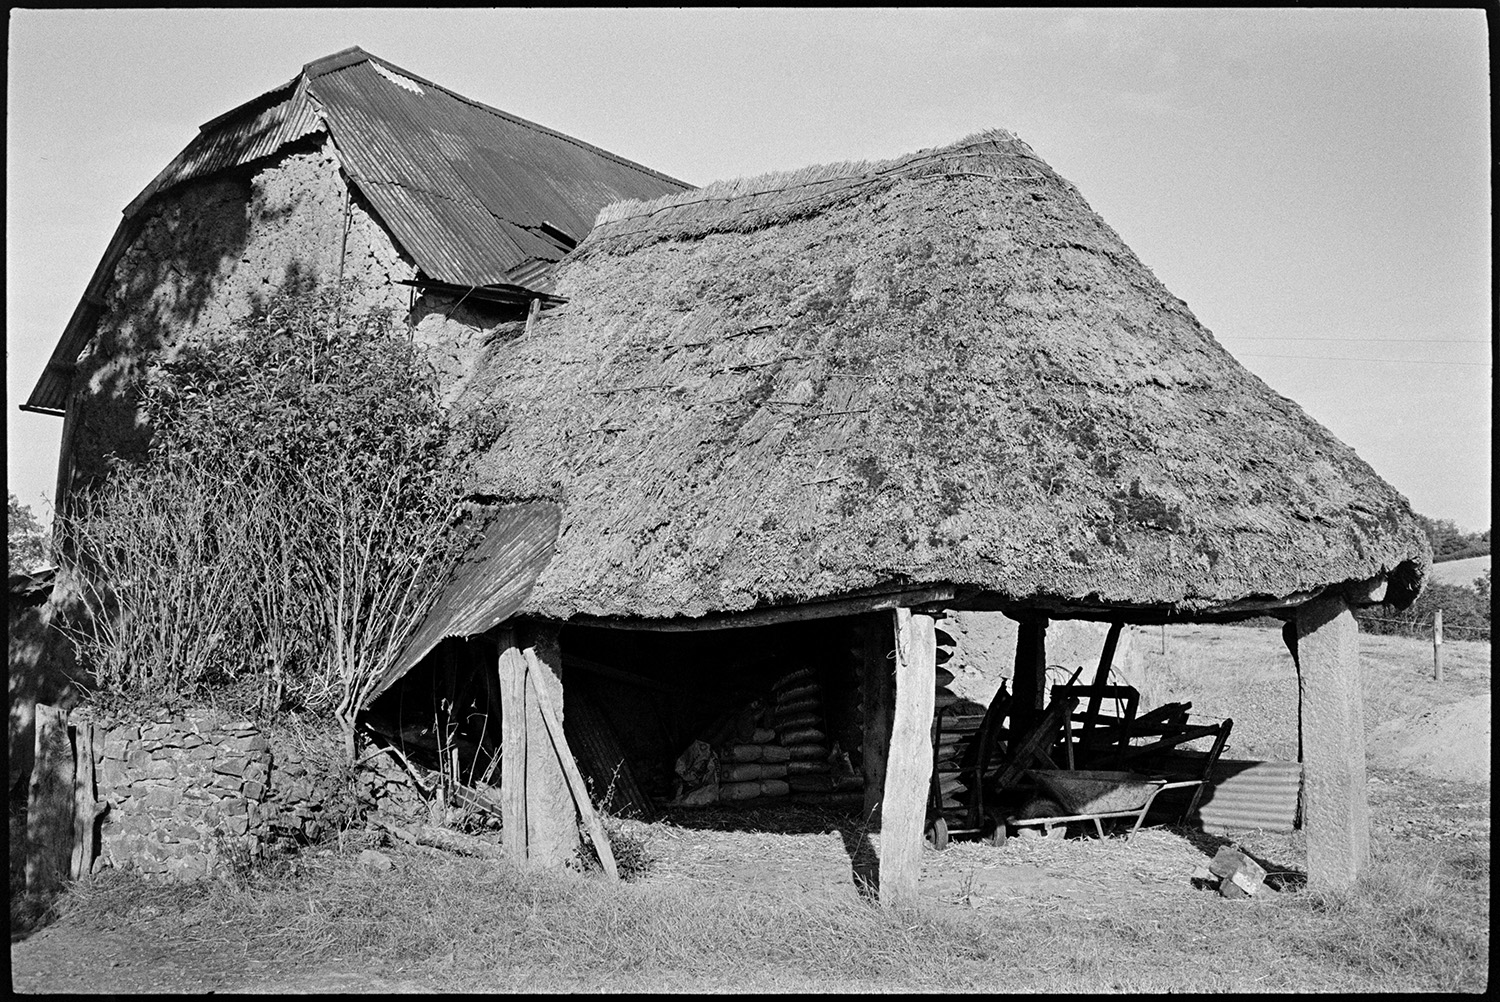 Barn and thatched roundhouse with pillars. 
[A cob barn with a corrugated iron roof and thatched roundhouse with wooden and stone pillars at Chapple, Winkleigh. A wheelbarrow and sacks can be seen under the roundhouse.]